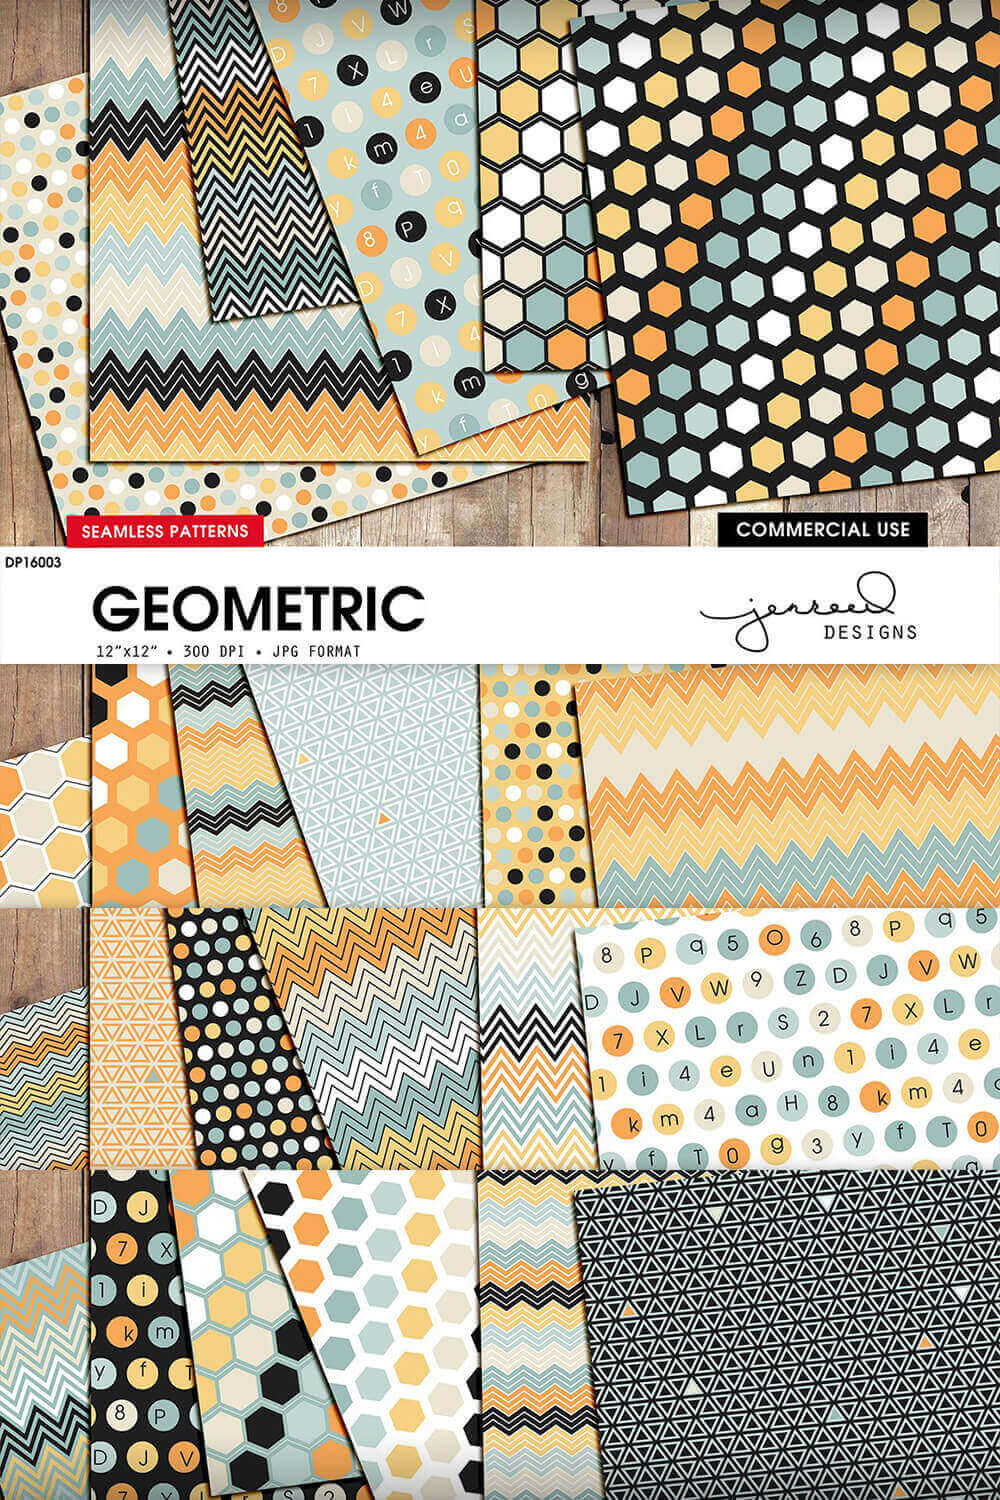 Two Pictures of Geometric Seamless Patterns with Unusual Design.